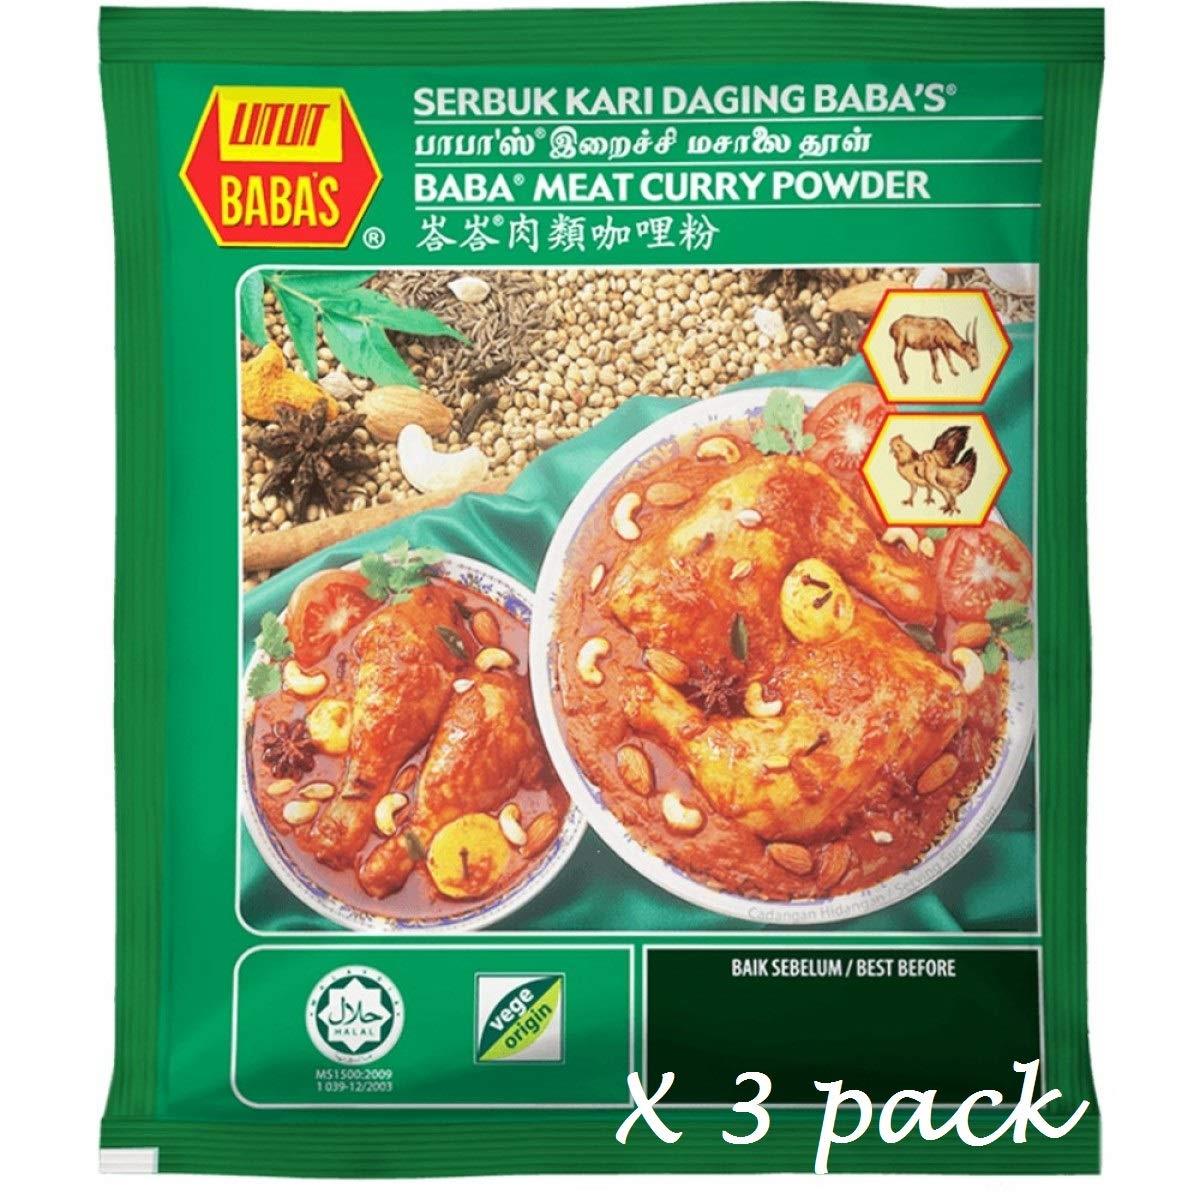 Baba's Powder 250g (Meat Curry, 3 Packs)